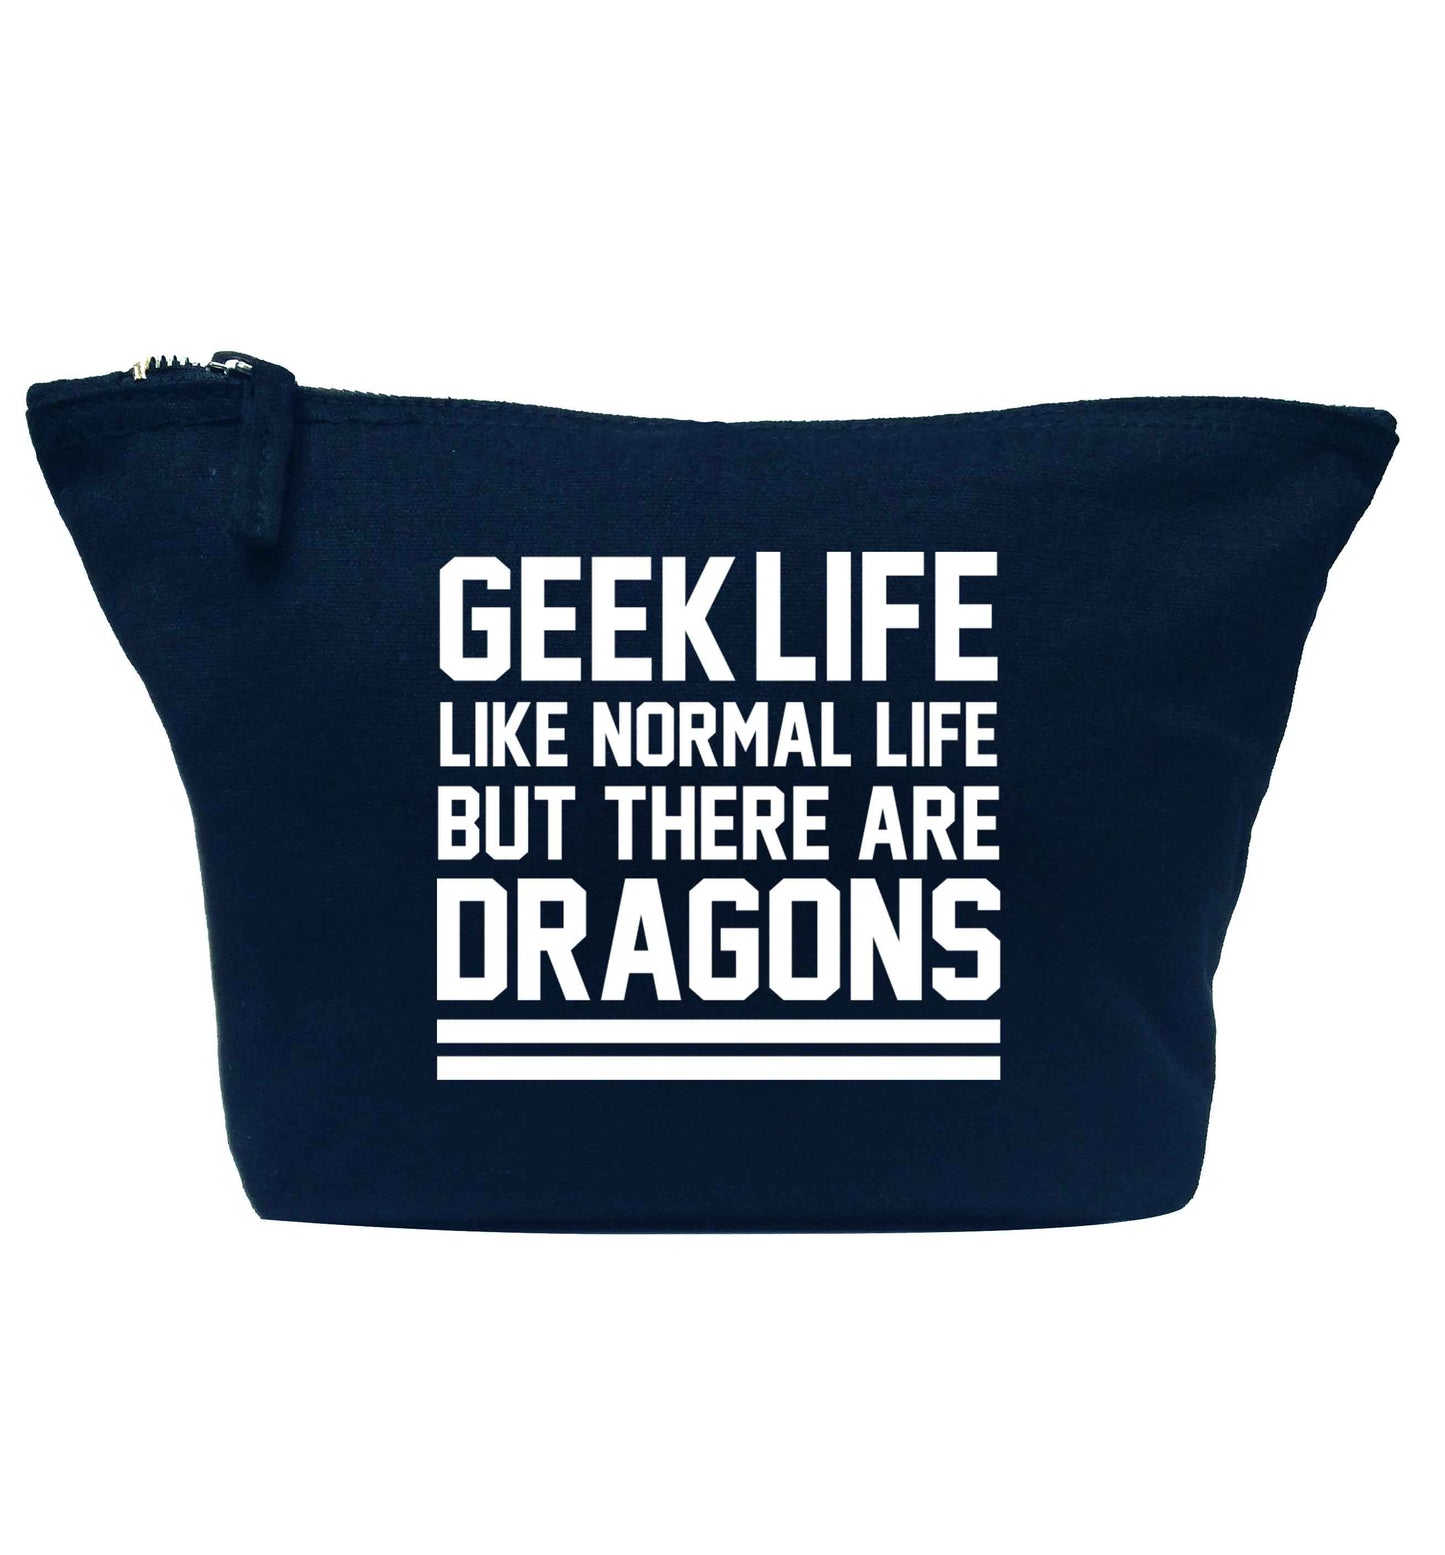 Geek life like normal life but there are dragons navy makeup bag